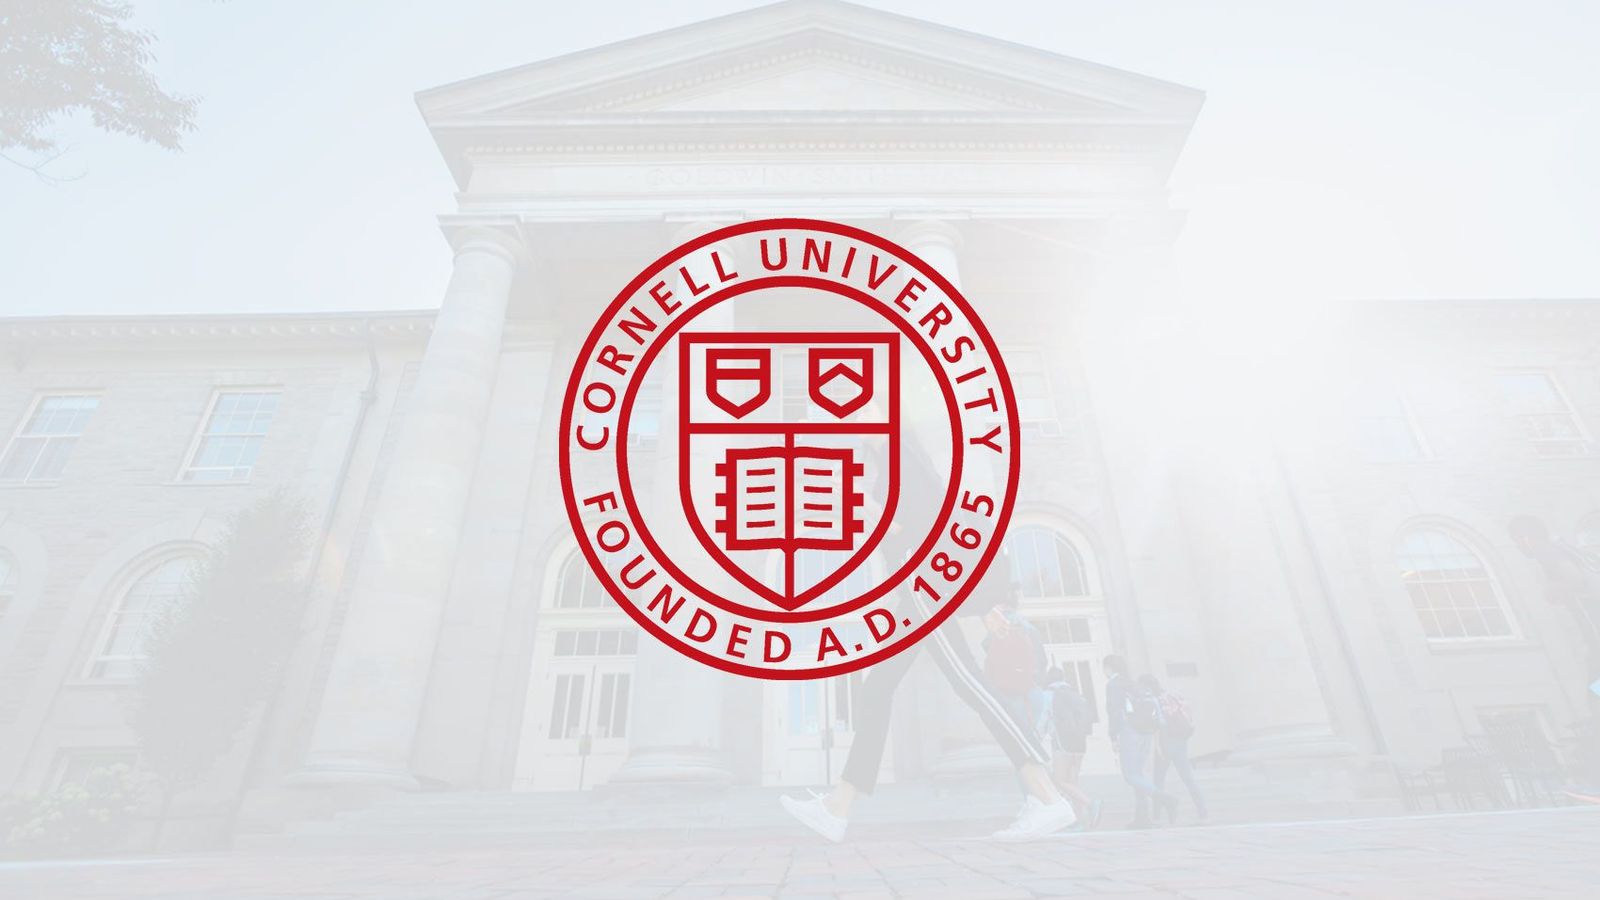  Cornell University chose Cornerstone to provide a true enterprise system dedicated to promoting learning in a large, decentralized educational environment